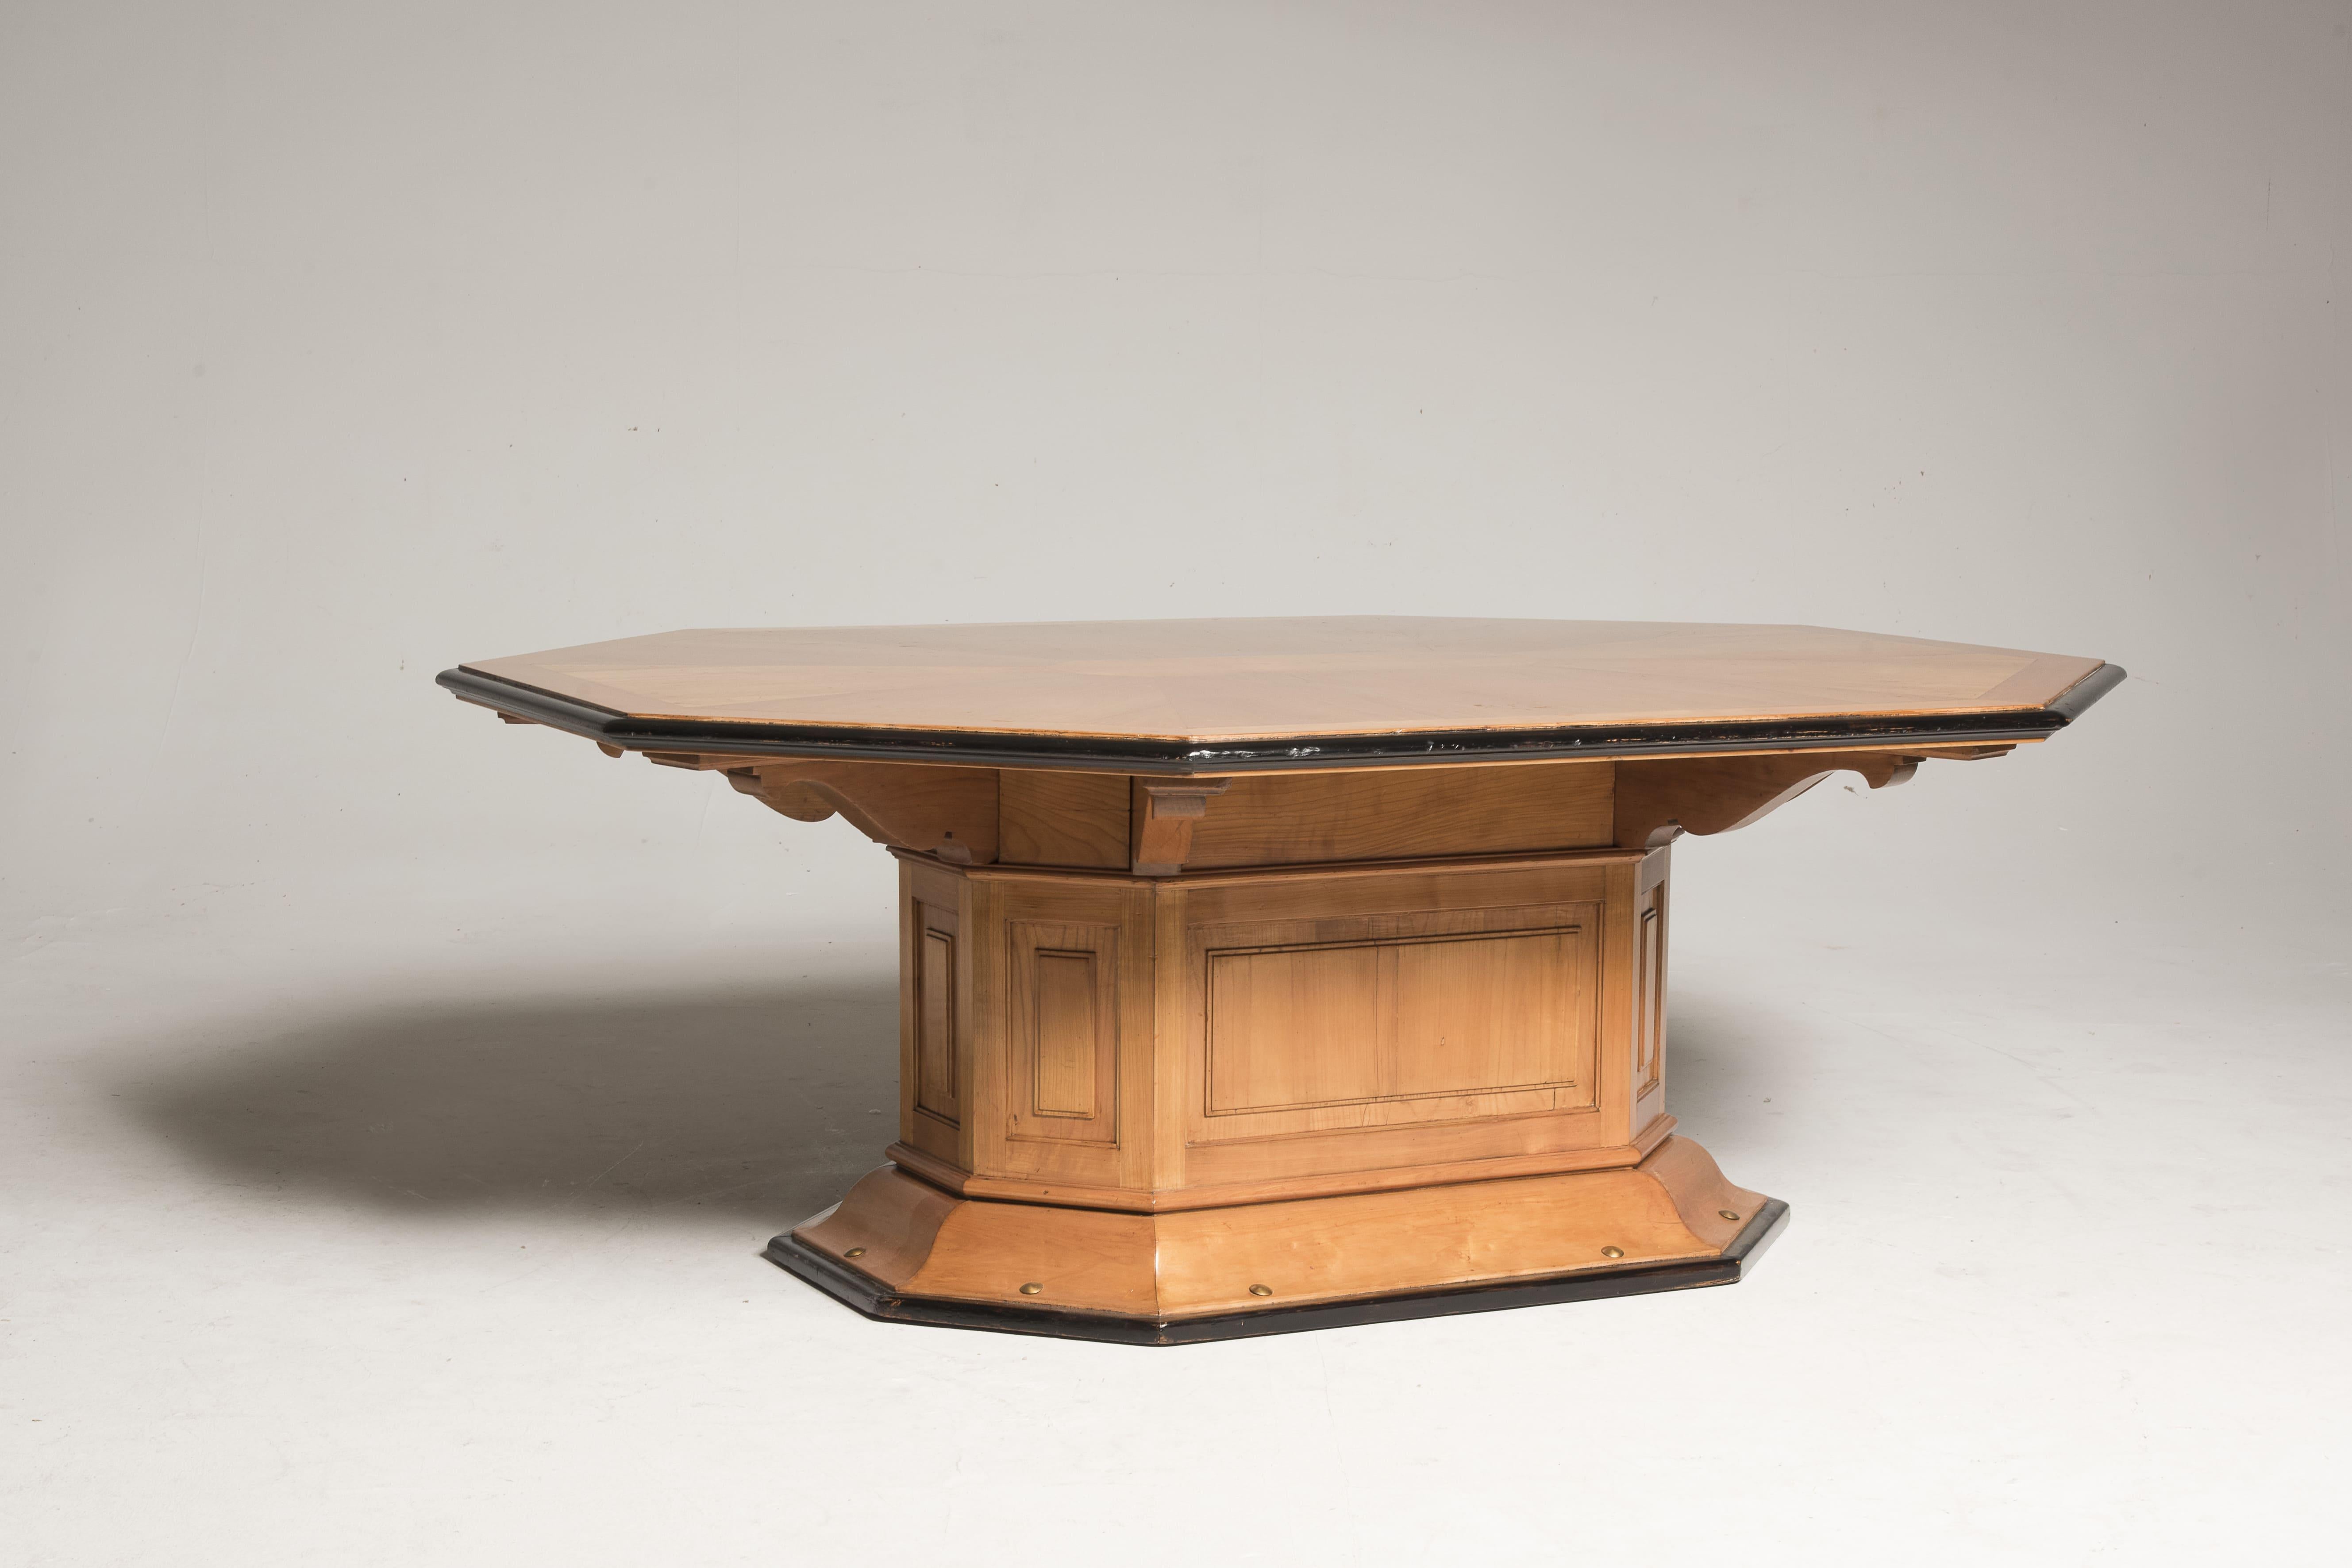 Art Deco Table form Italy from 1930s period.
The table is made in cherry wood, features black borders and brass studs on the foot.
It is particular for its octagoal section and its big central leg making this a sculptural and unique piece.
The